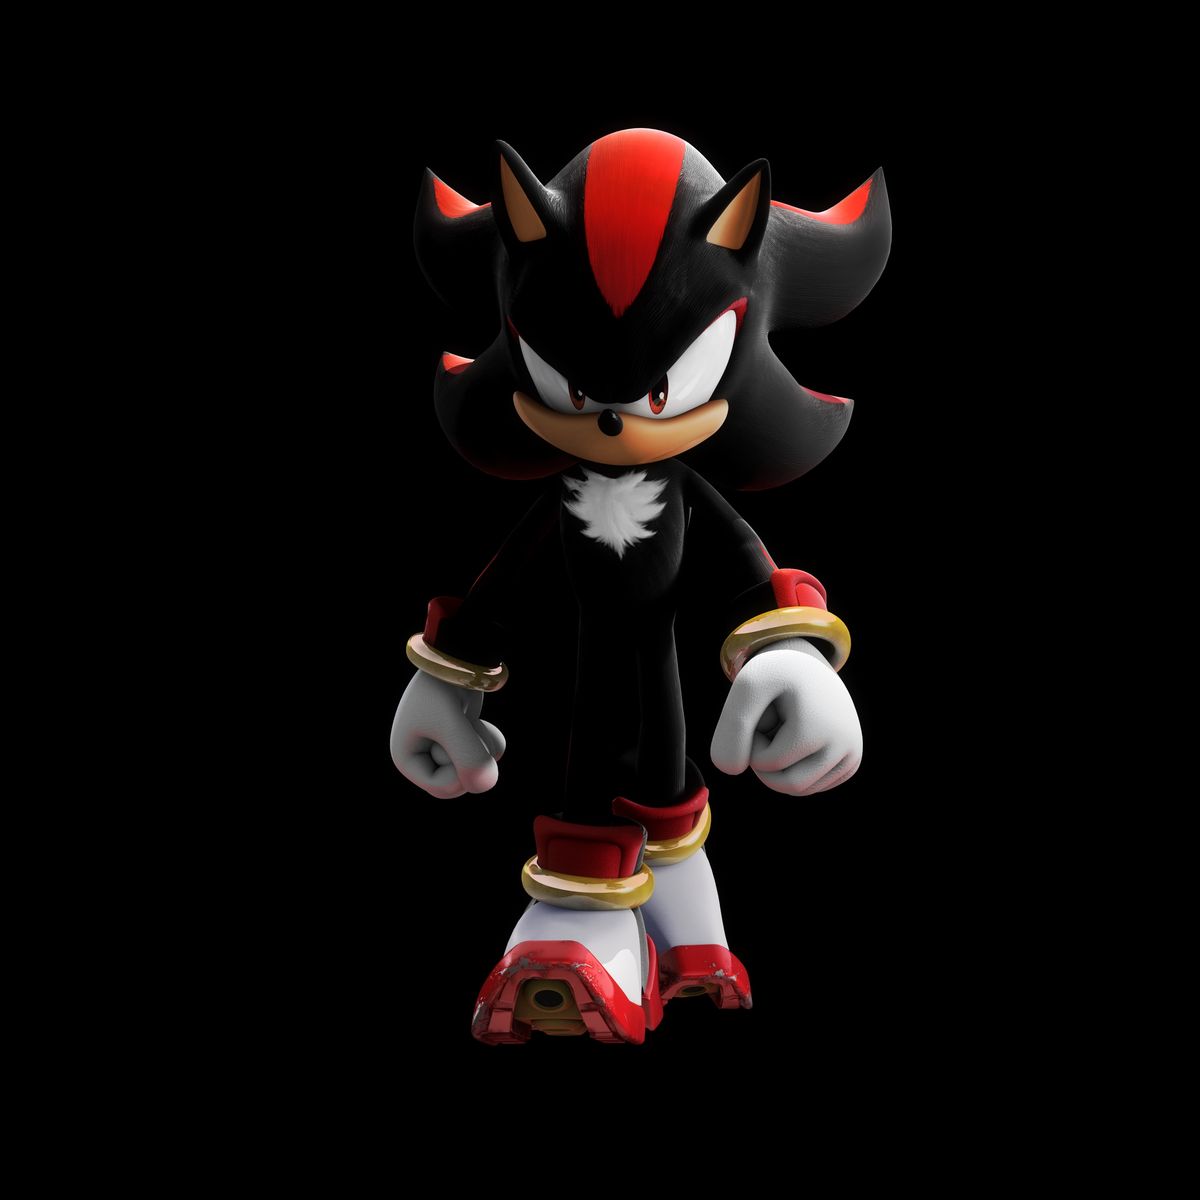 Shadow the Hedgehog Mario & Sonic at the Olympic Games Sonic the